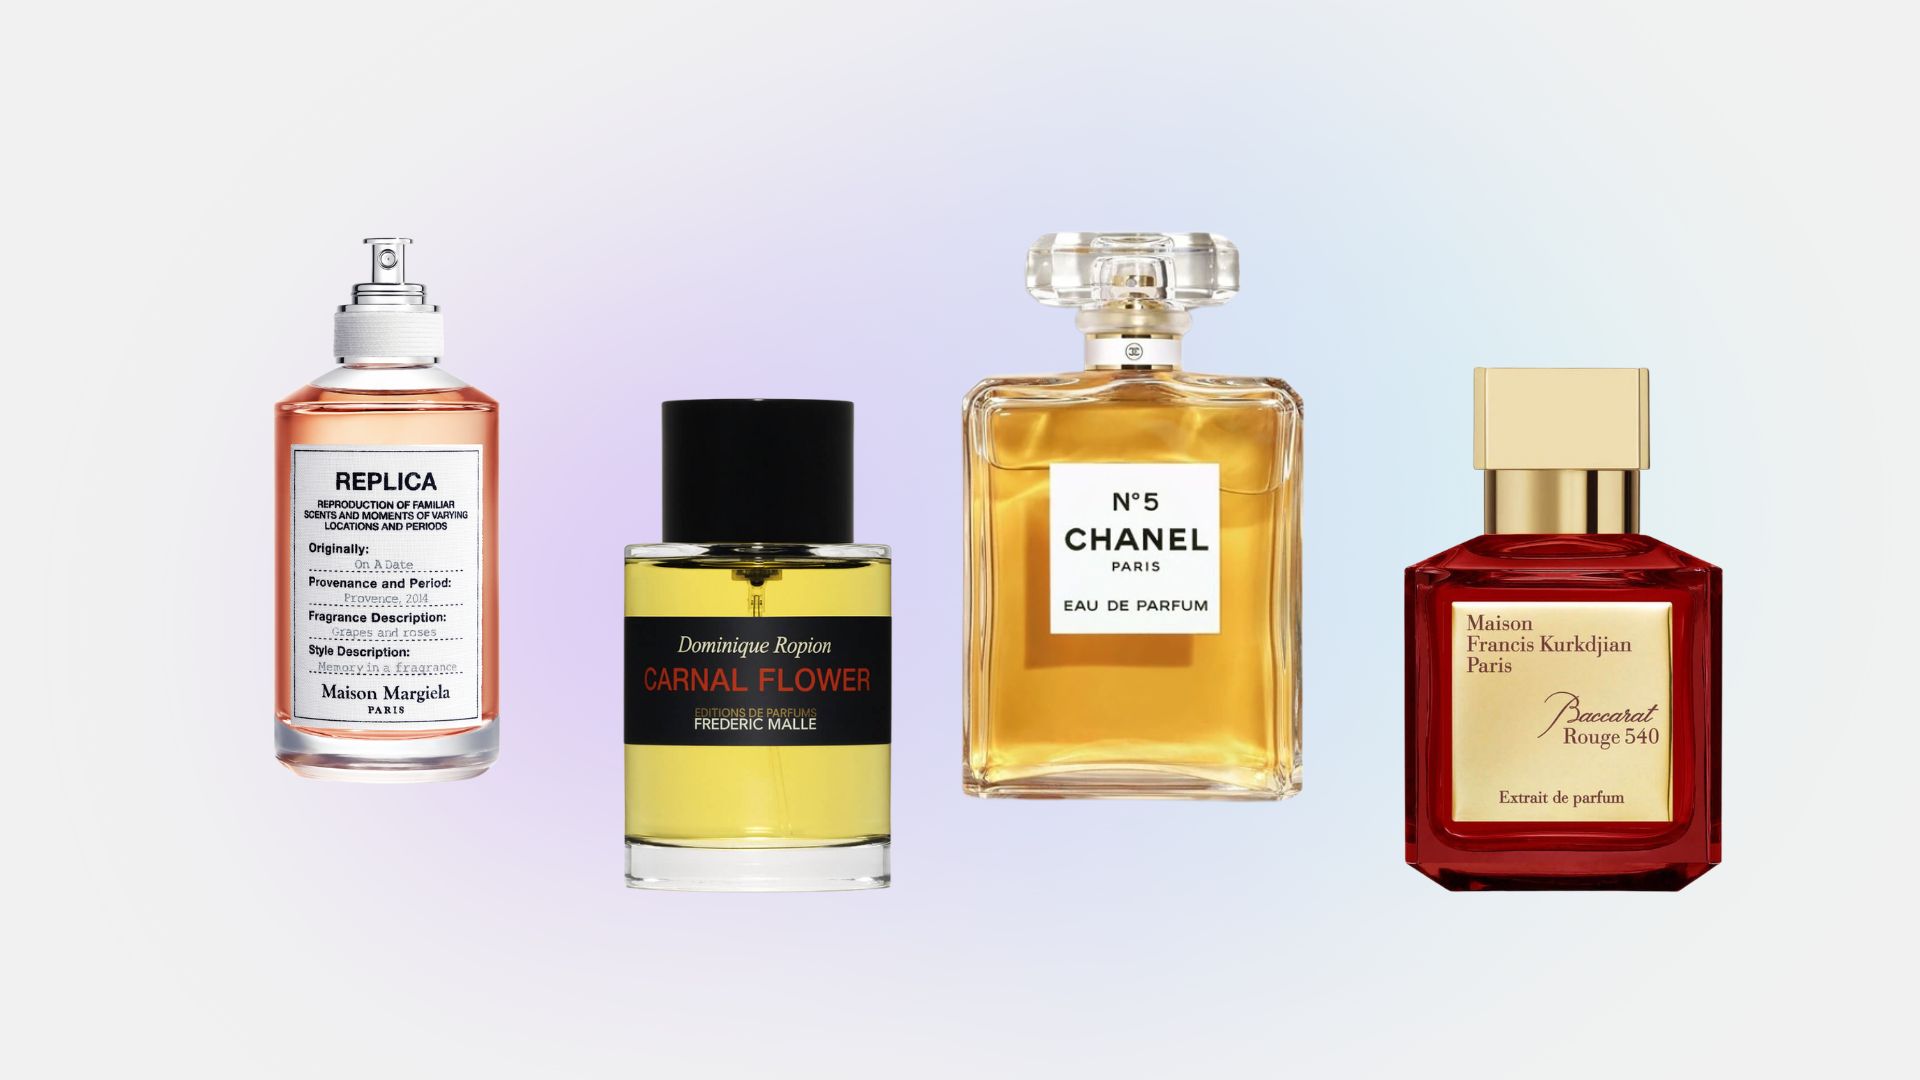 What Is The Difference Between Perfumes and Eau The Toilette? | Caviar ...